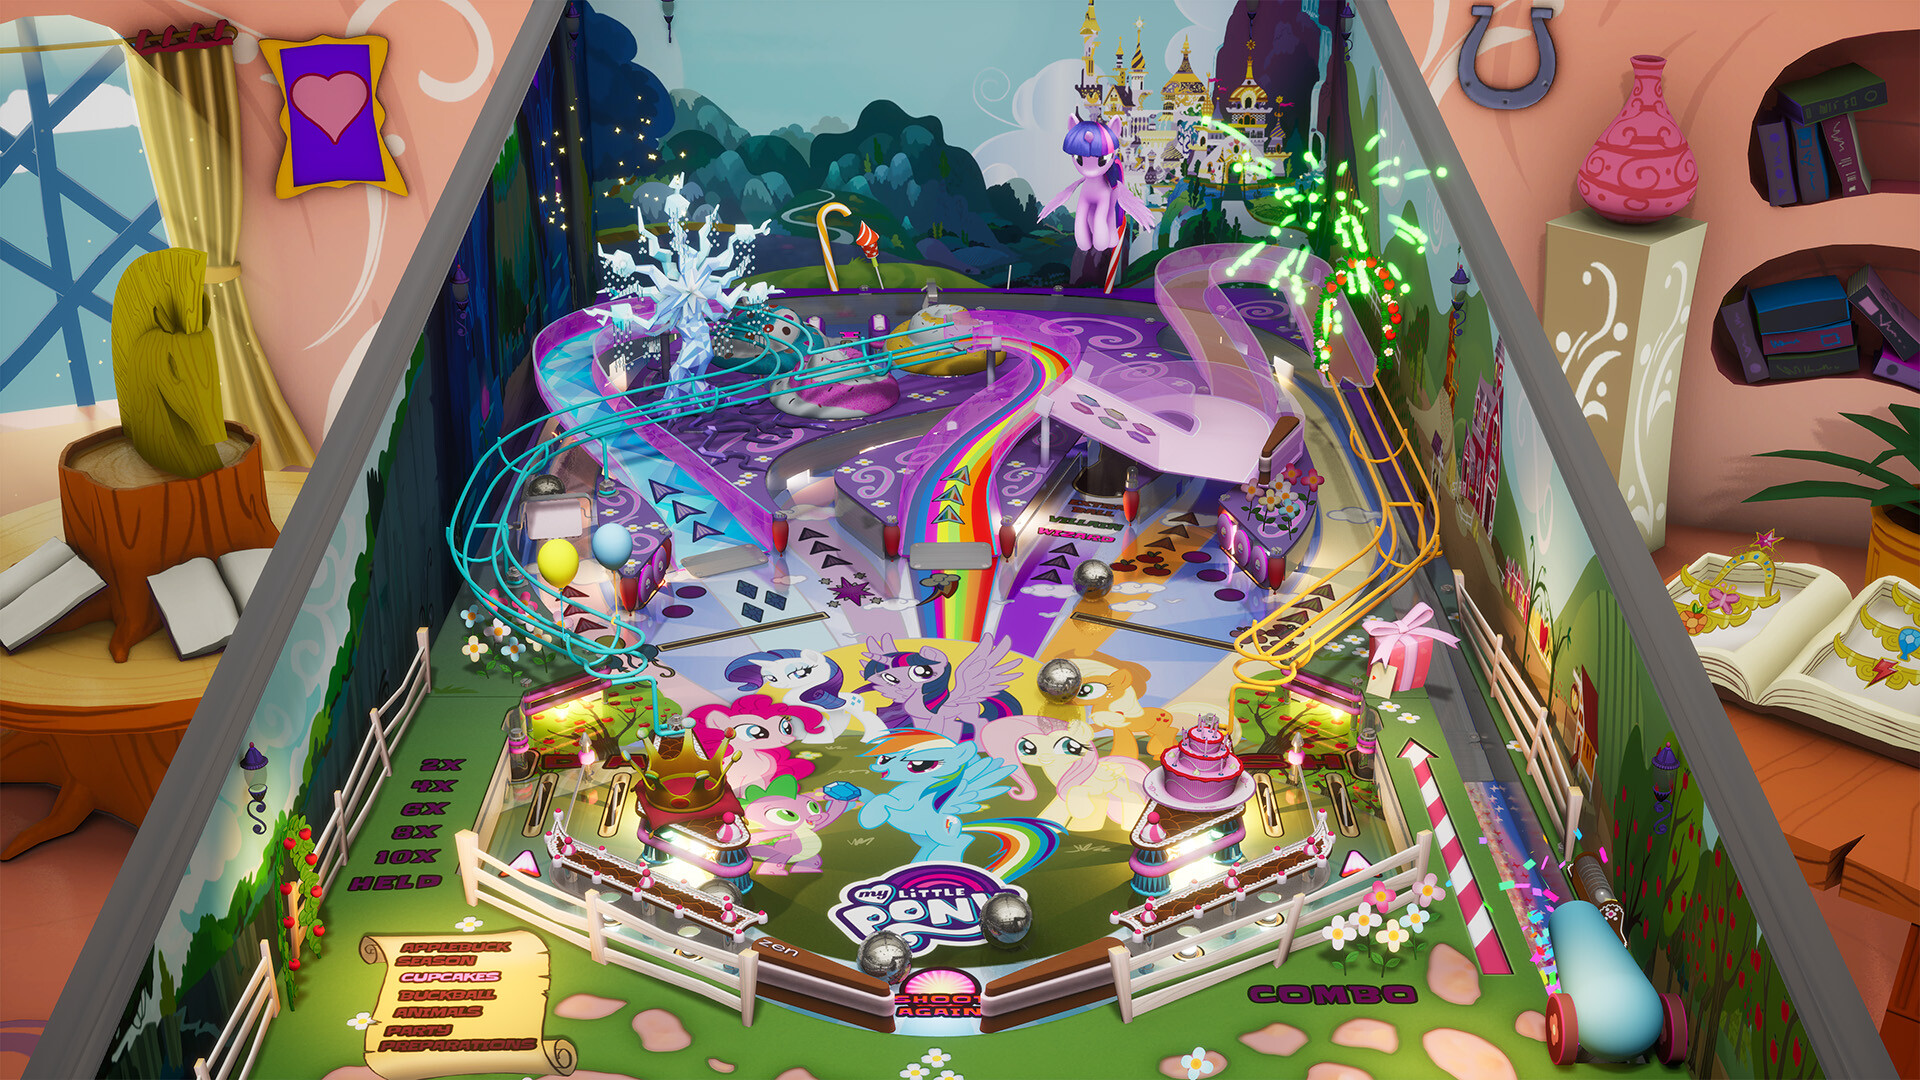 The Brick Castle: My Little Pony Equestria Girls: Rainbow Rocks DVD review  and giveaway